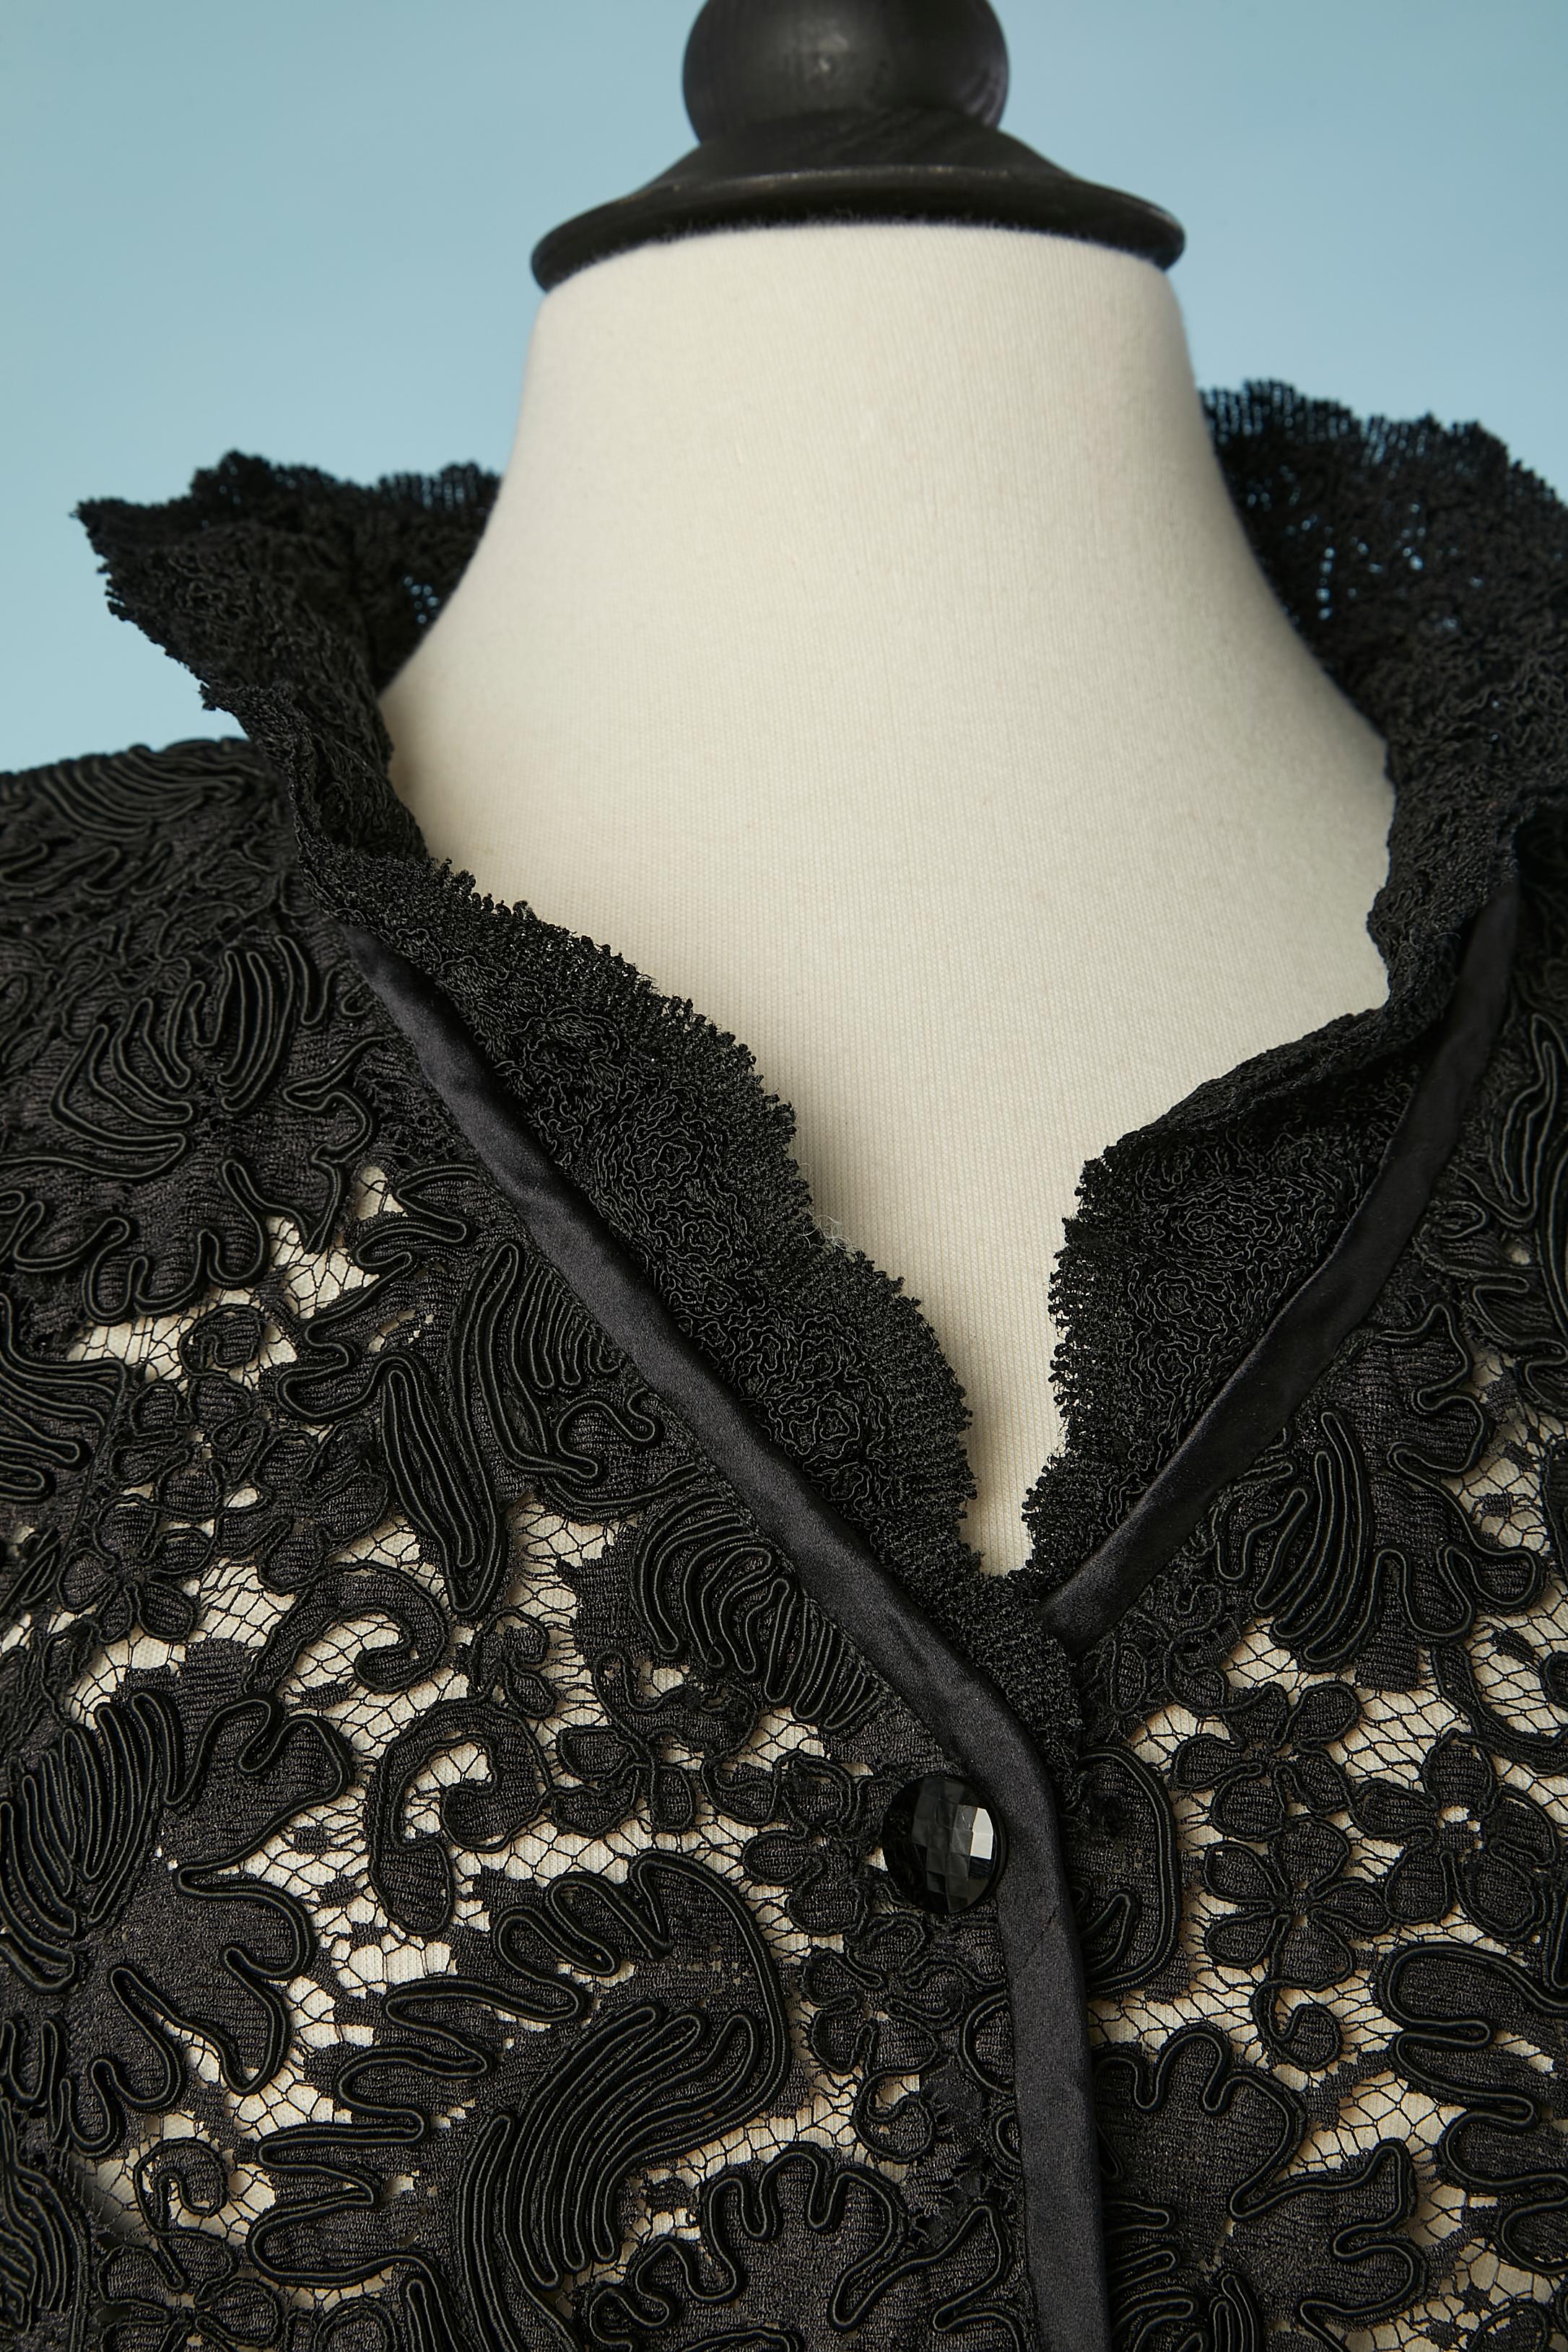  Black guipure evening jacket with ruffle collar. Black satin piping. Shoulder pad. See-through. One snap covered with fabric in the top middle front. 
SIZE 38